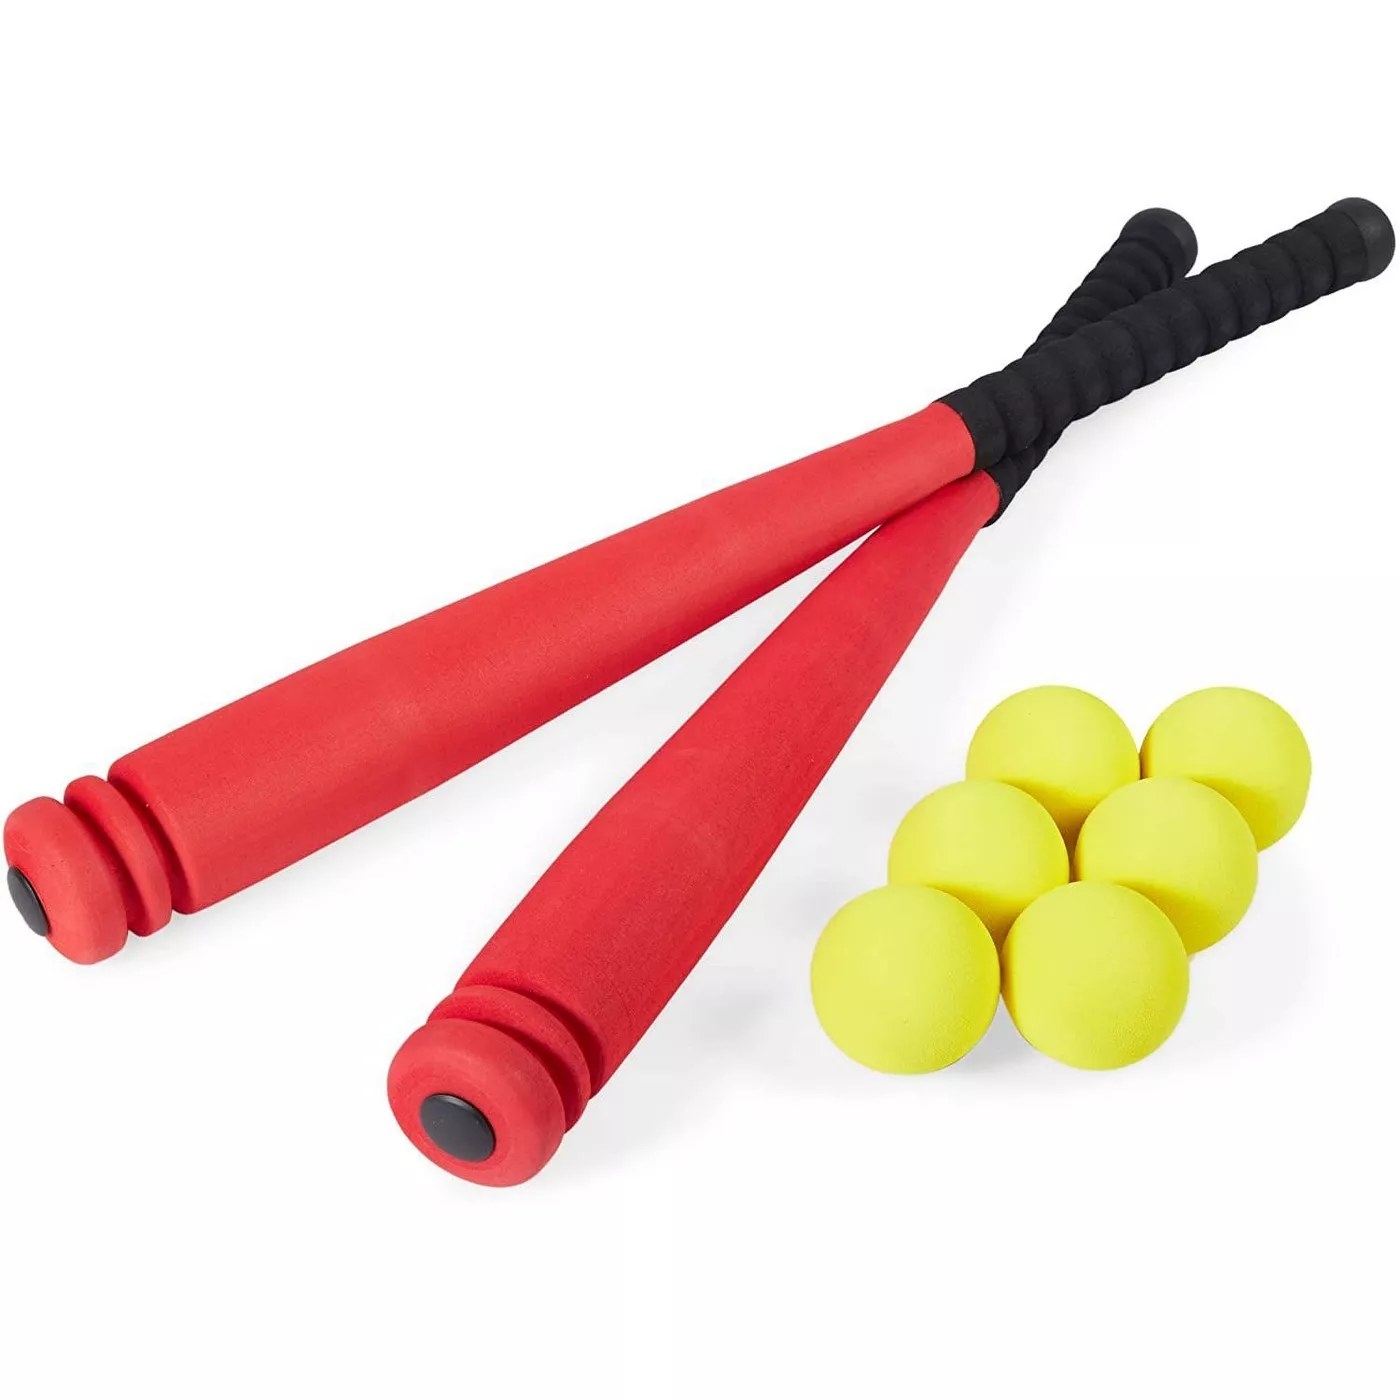 The red bats and yellow balls